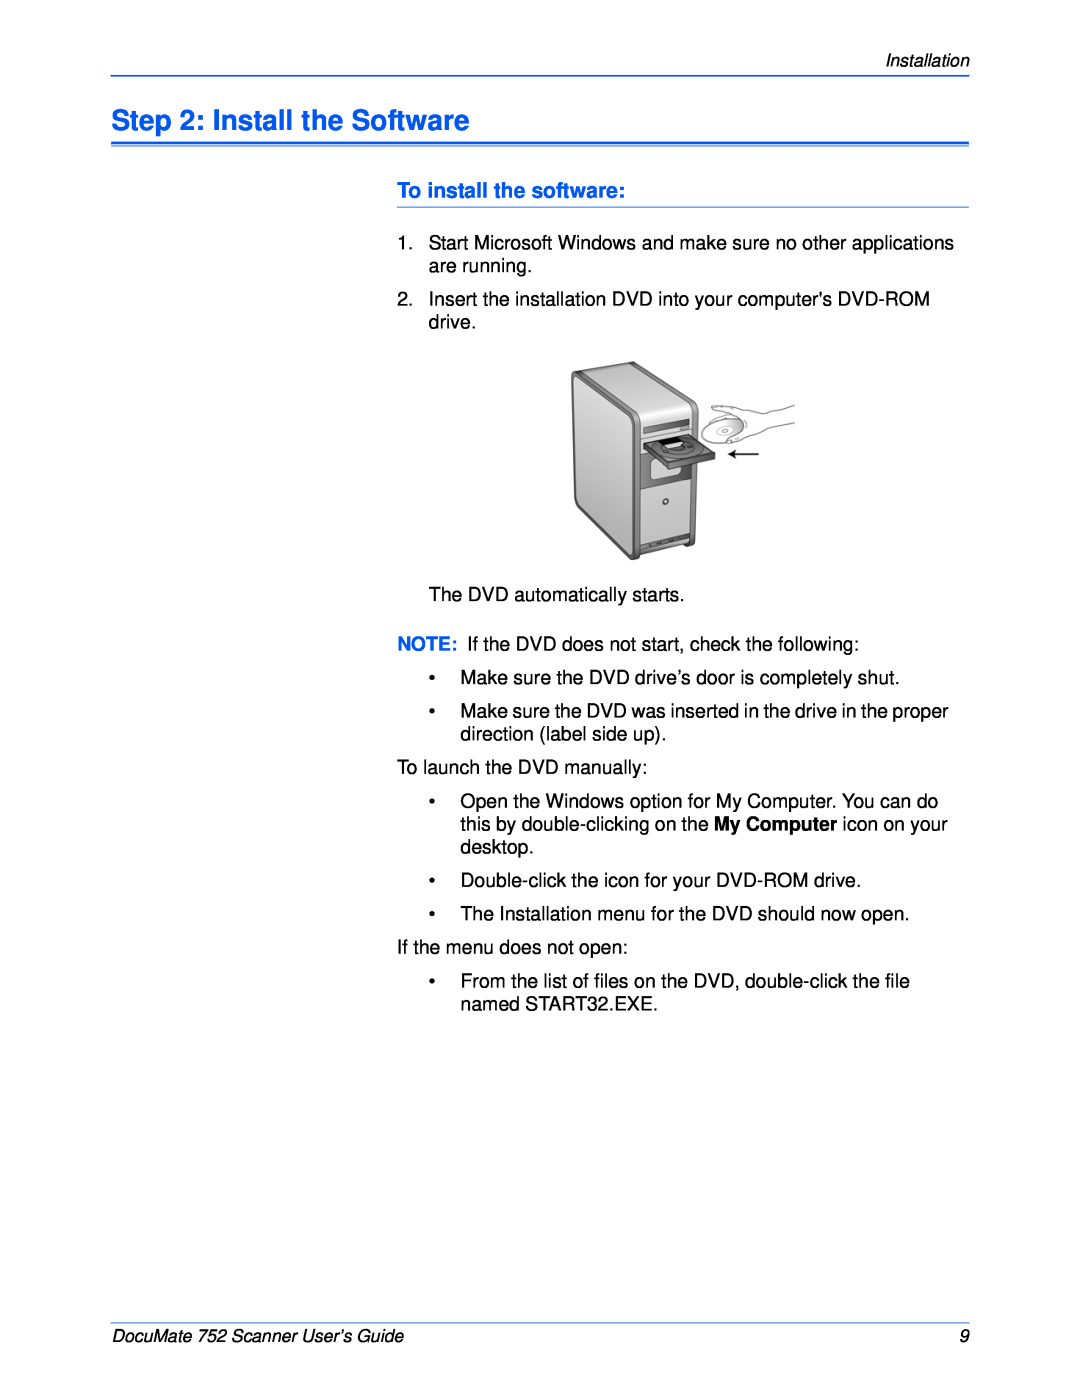 Xerox 752 manual Install the Software, To install the software 